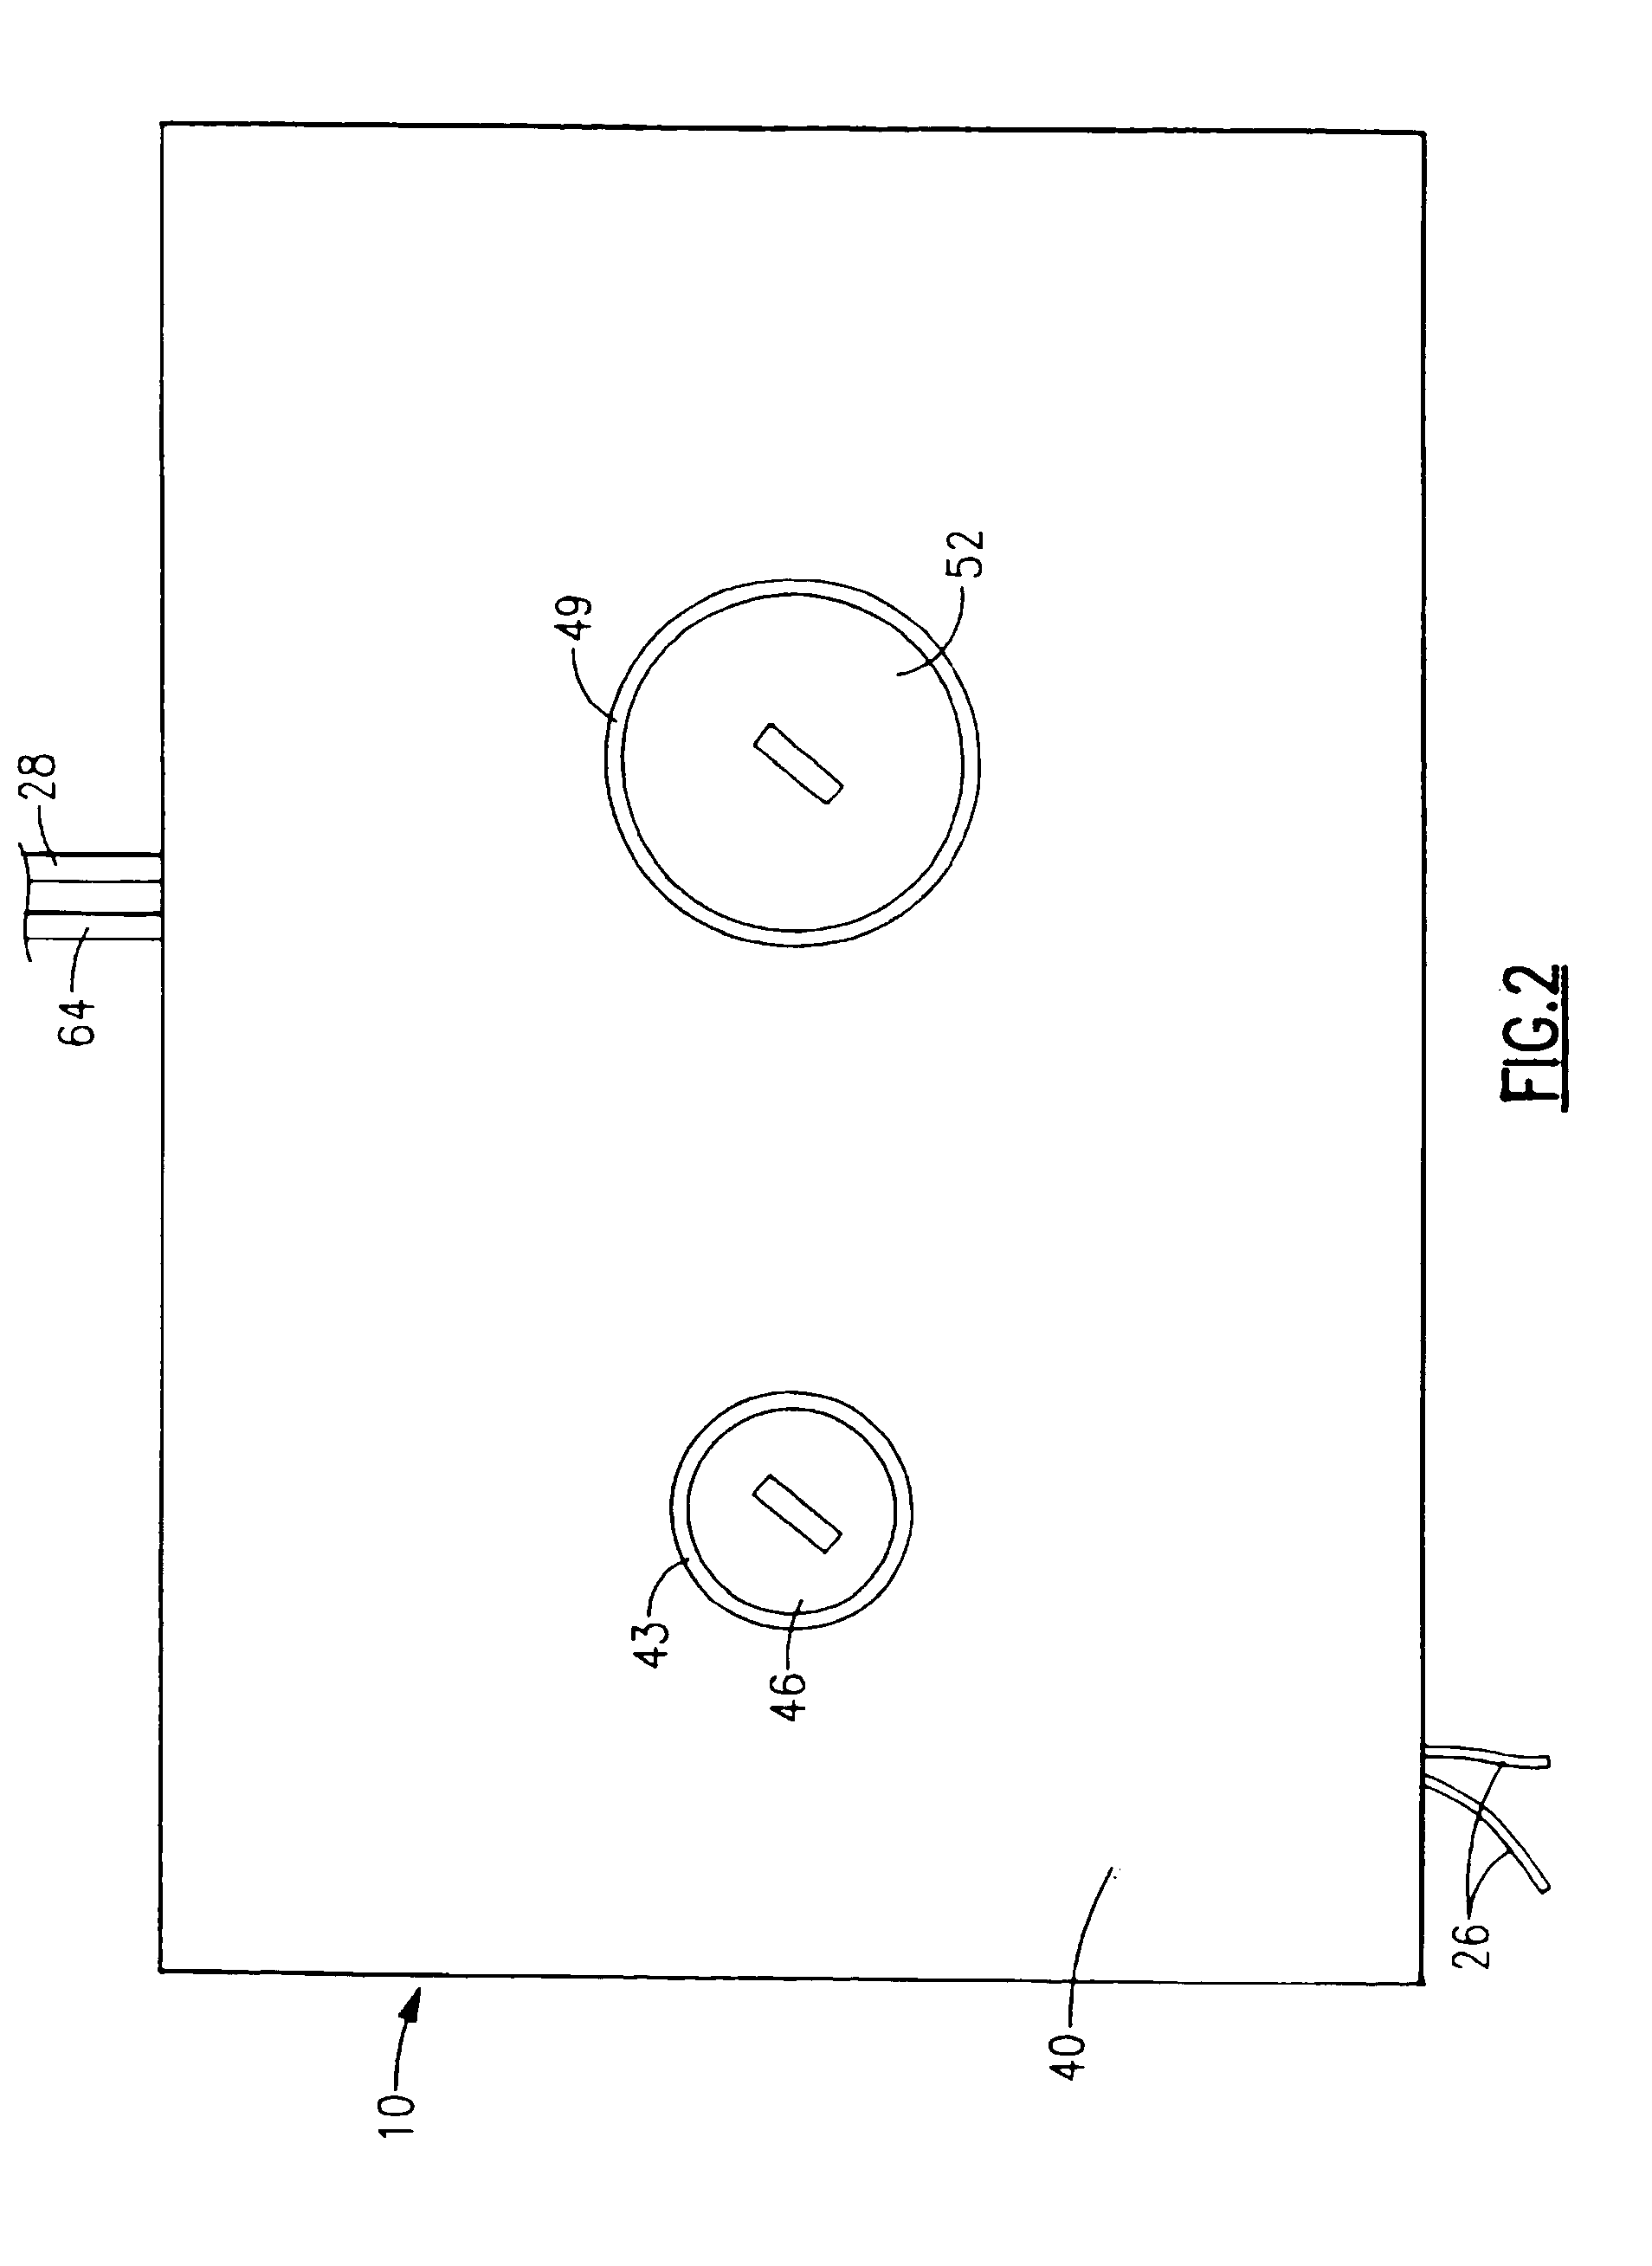 Body heating/cooling apparatus